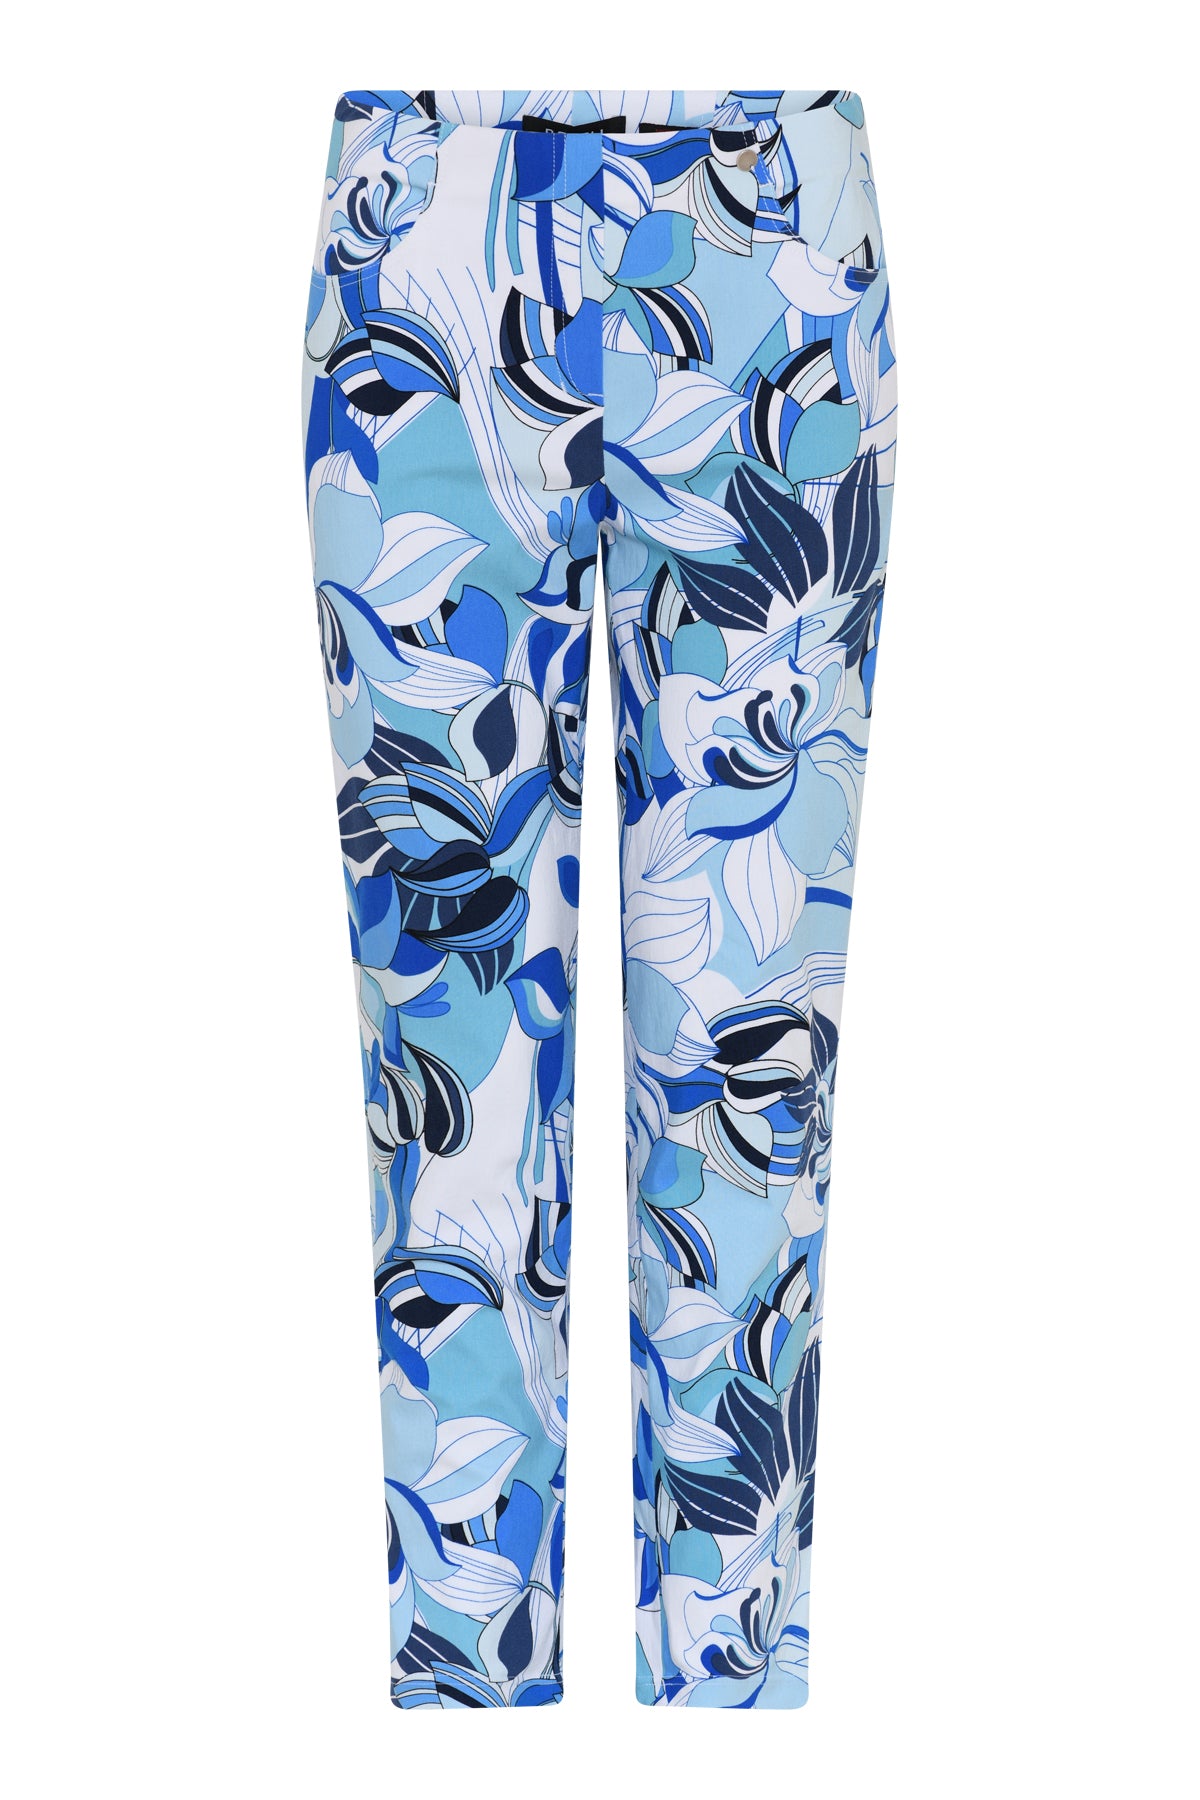 Robell Bella 09 Blue Printed Trousers